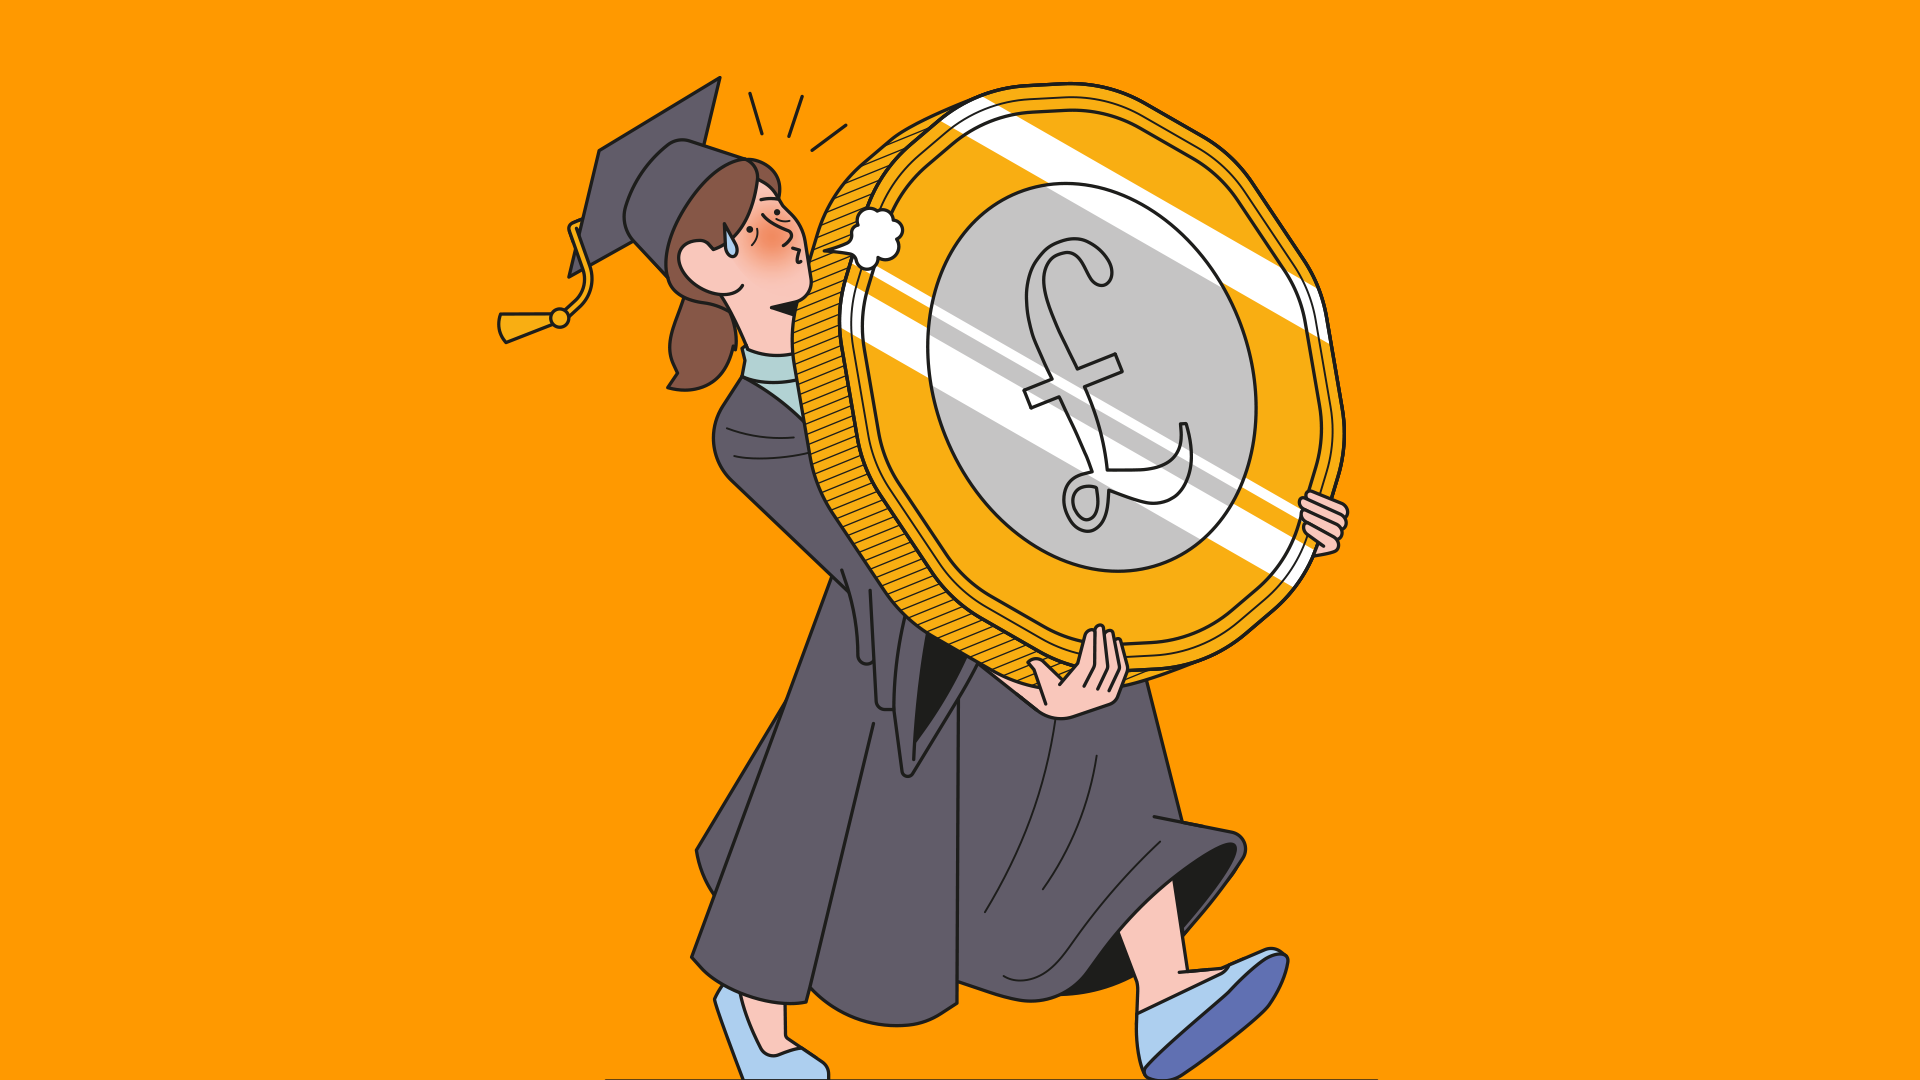 Illustration of a student struggling while carrying a heavy coin